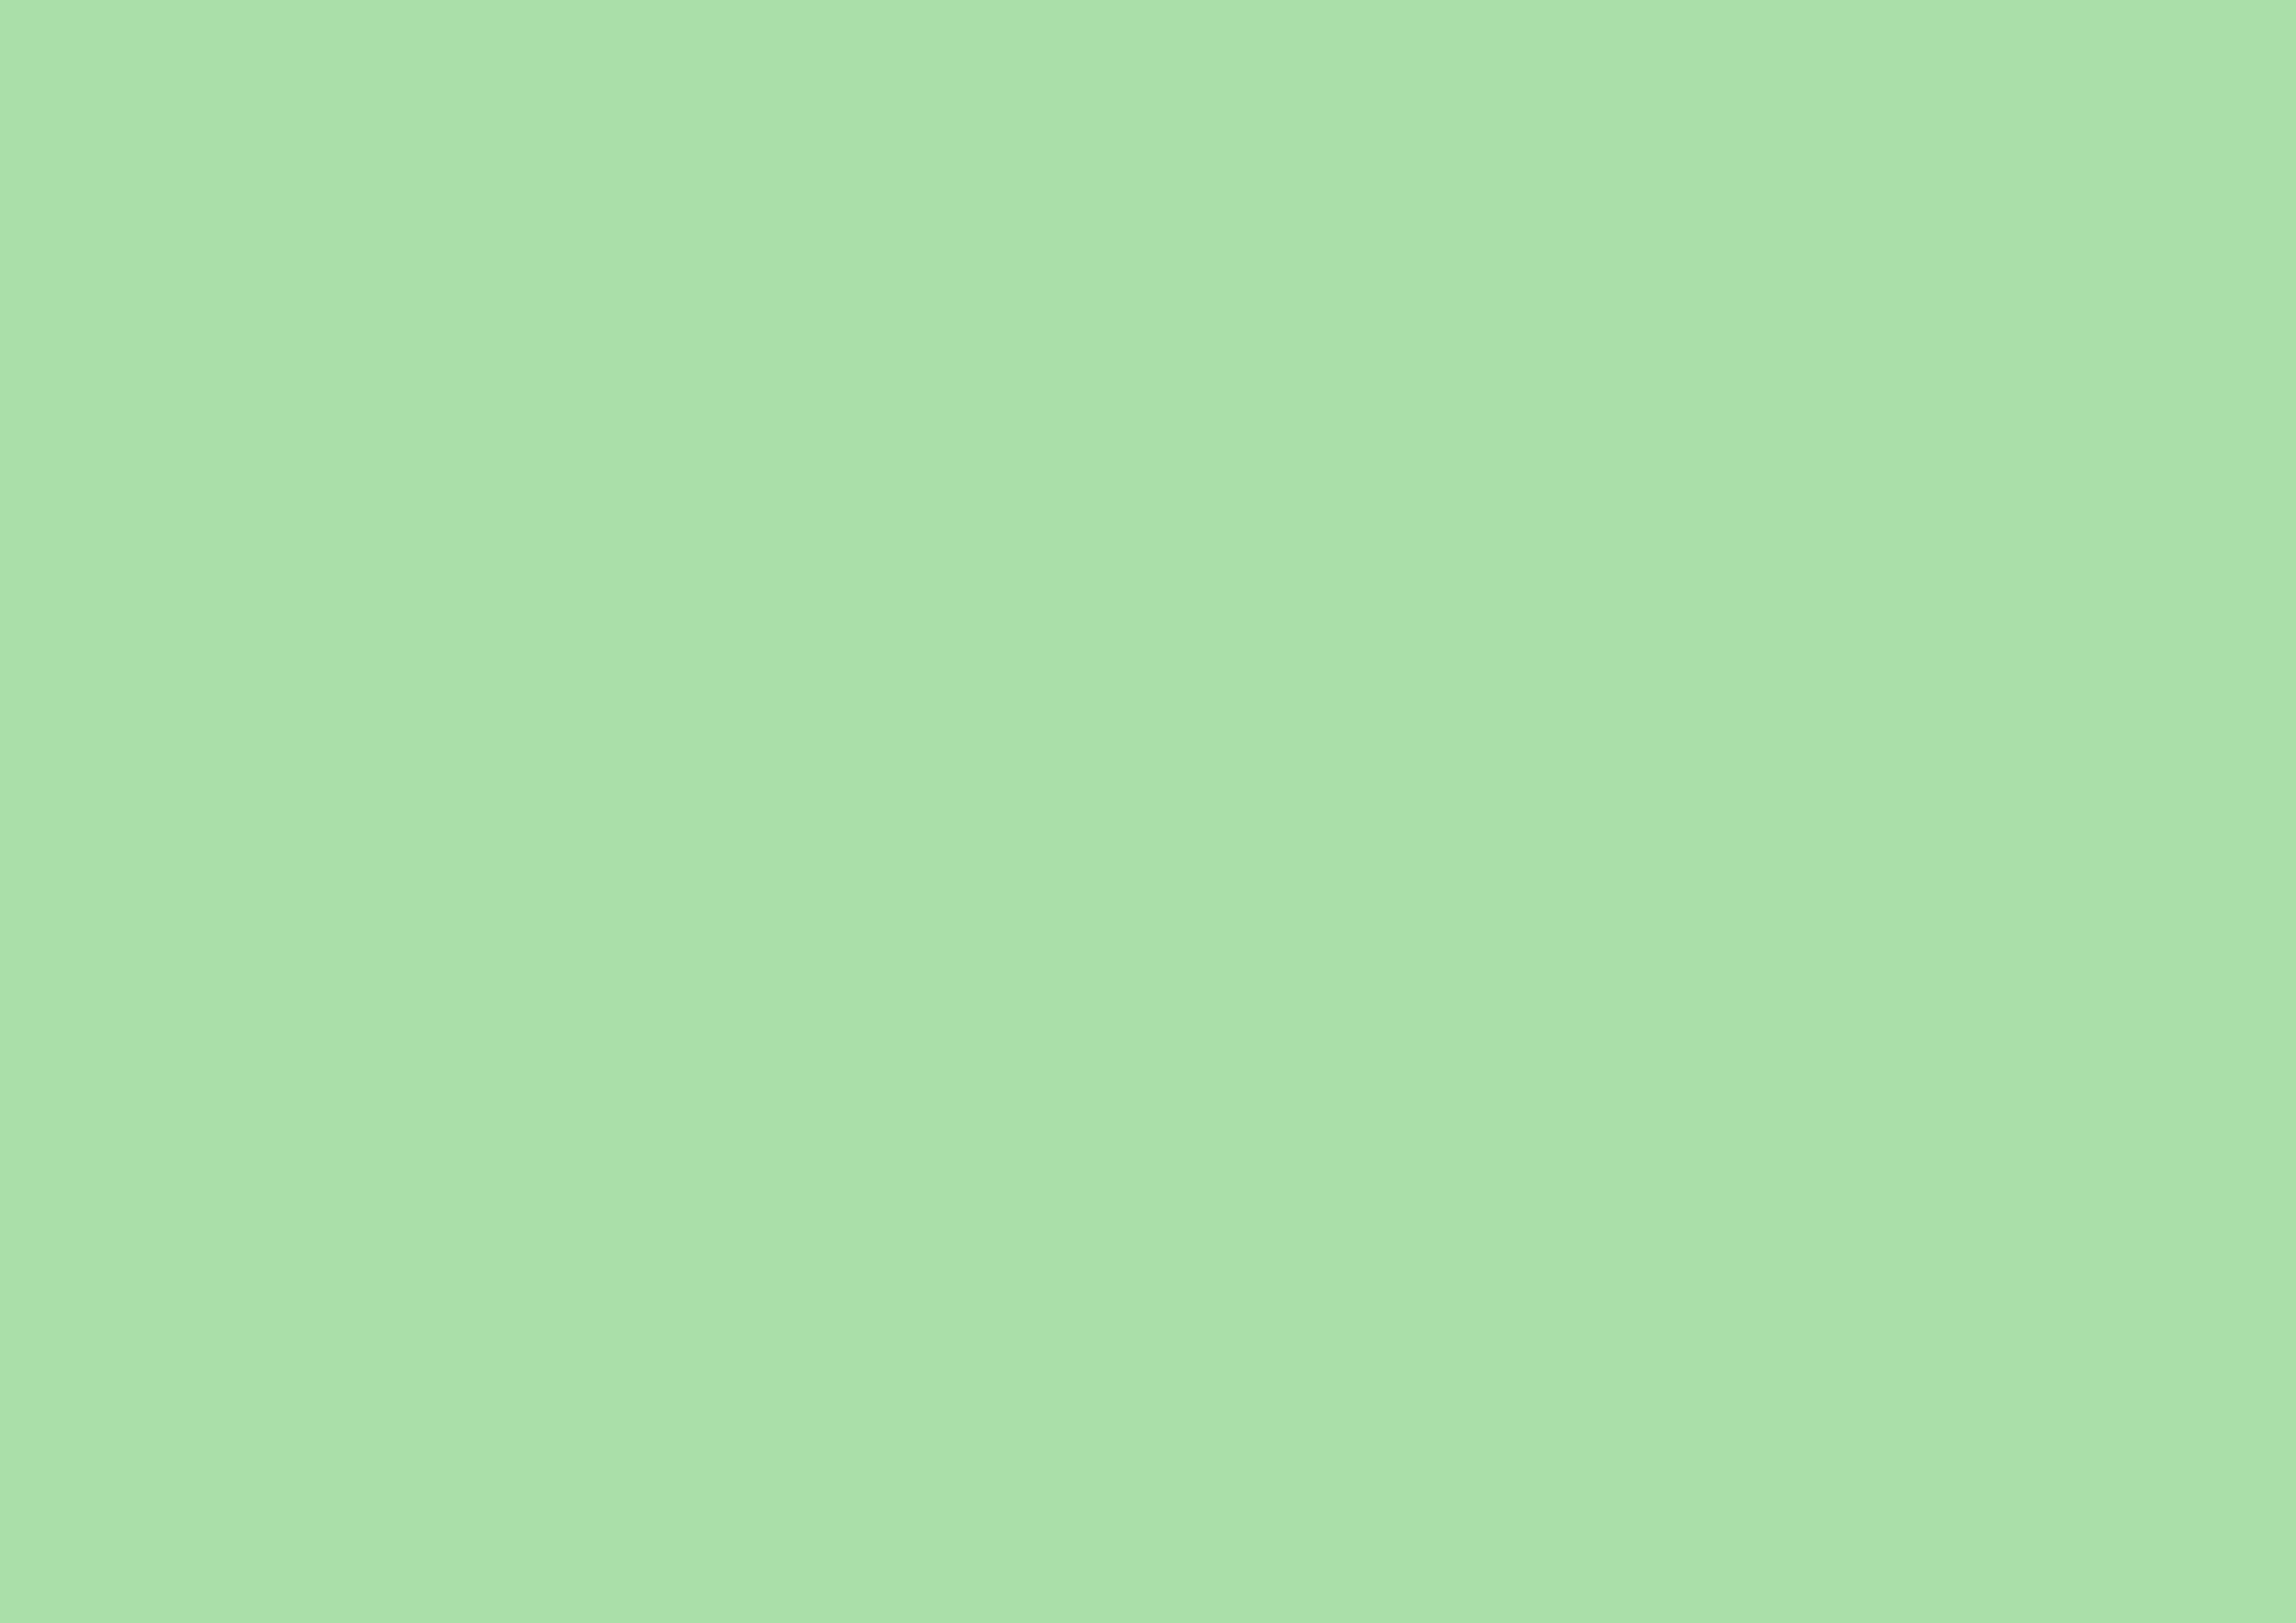 3508x2480 Light Moss Green Solid Color Background